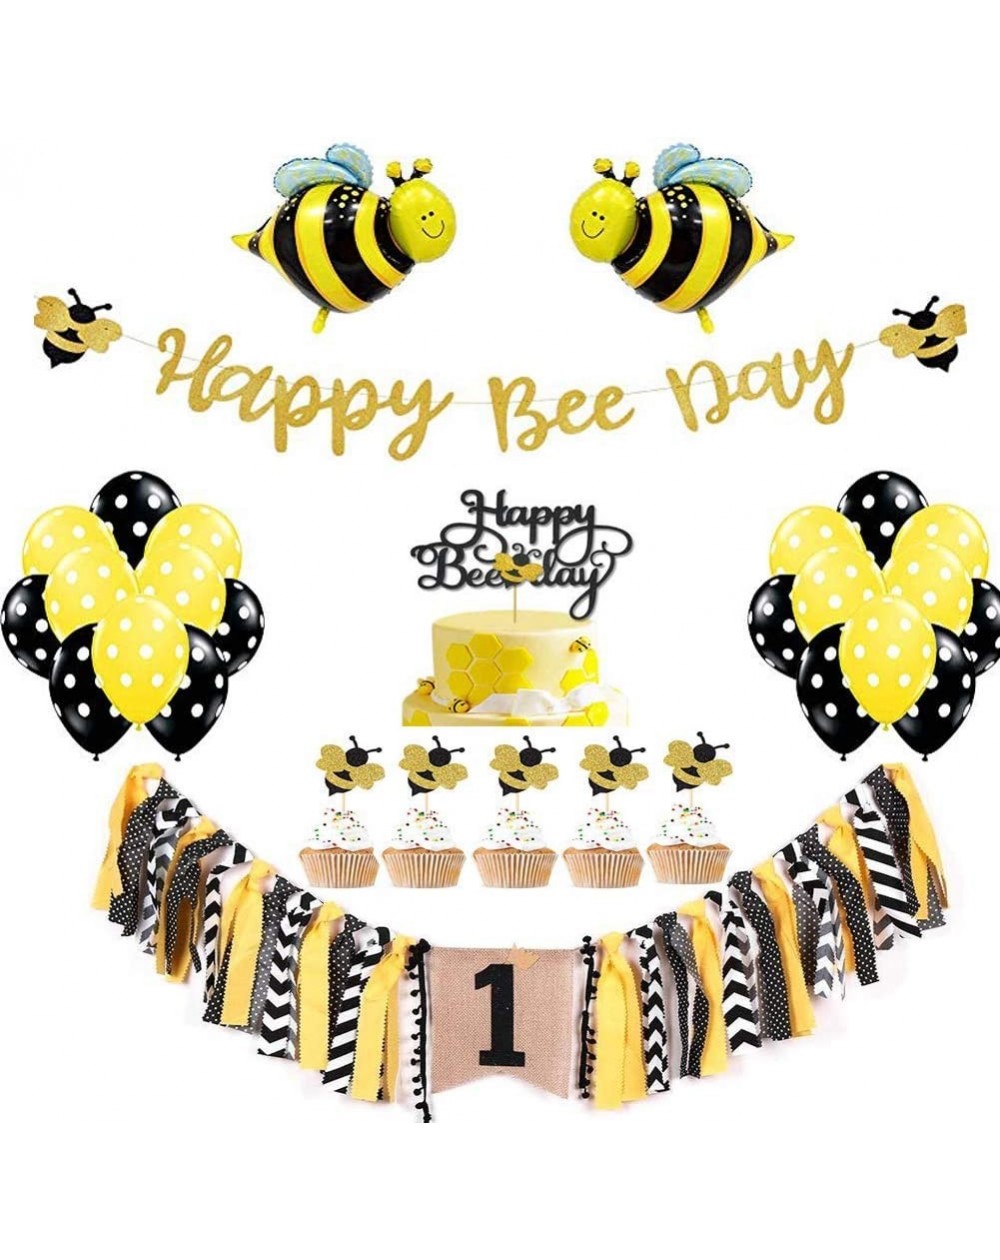 Party Packs Bee First Birthday Party Decorations Set for Baby Showers Bumblebee Themed Party Supplies With Happy Bee Day Bann...